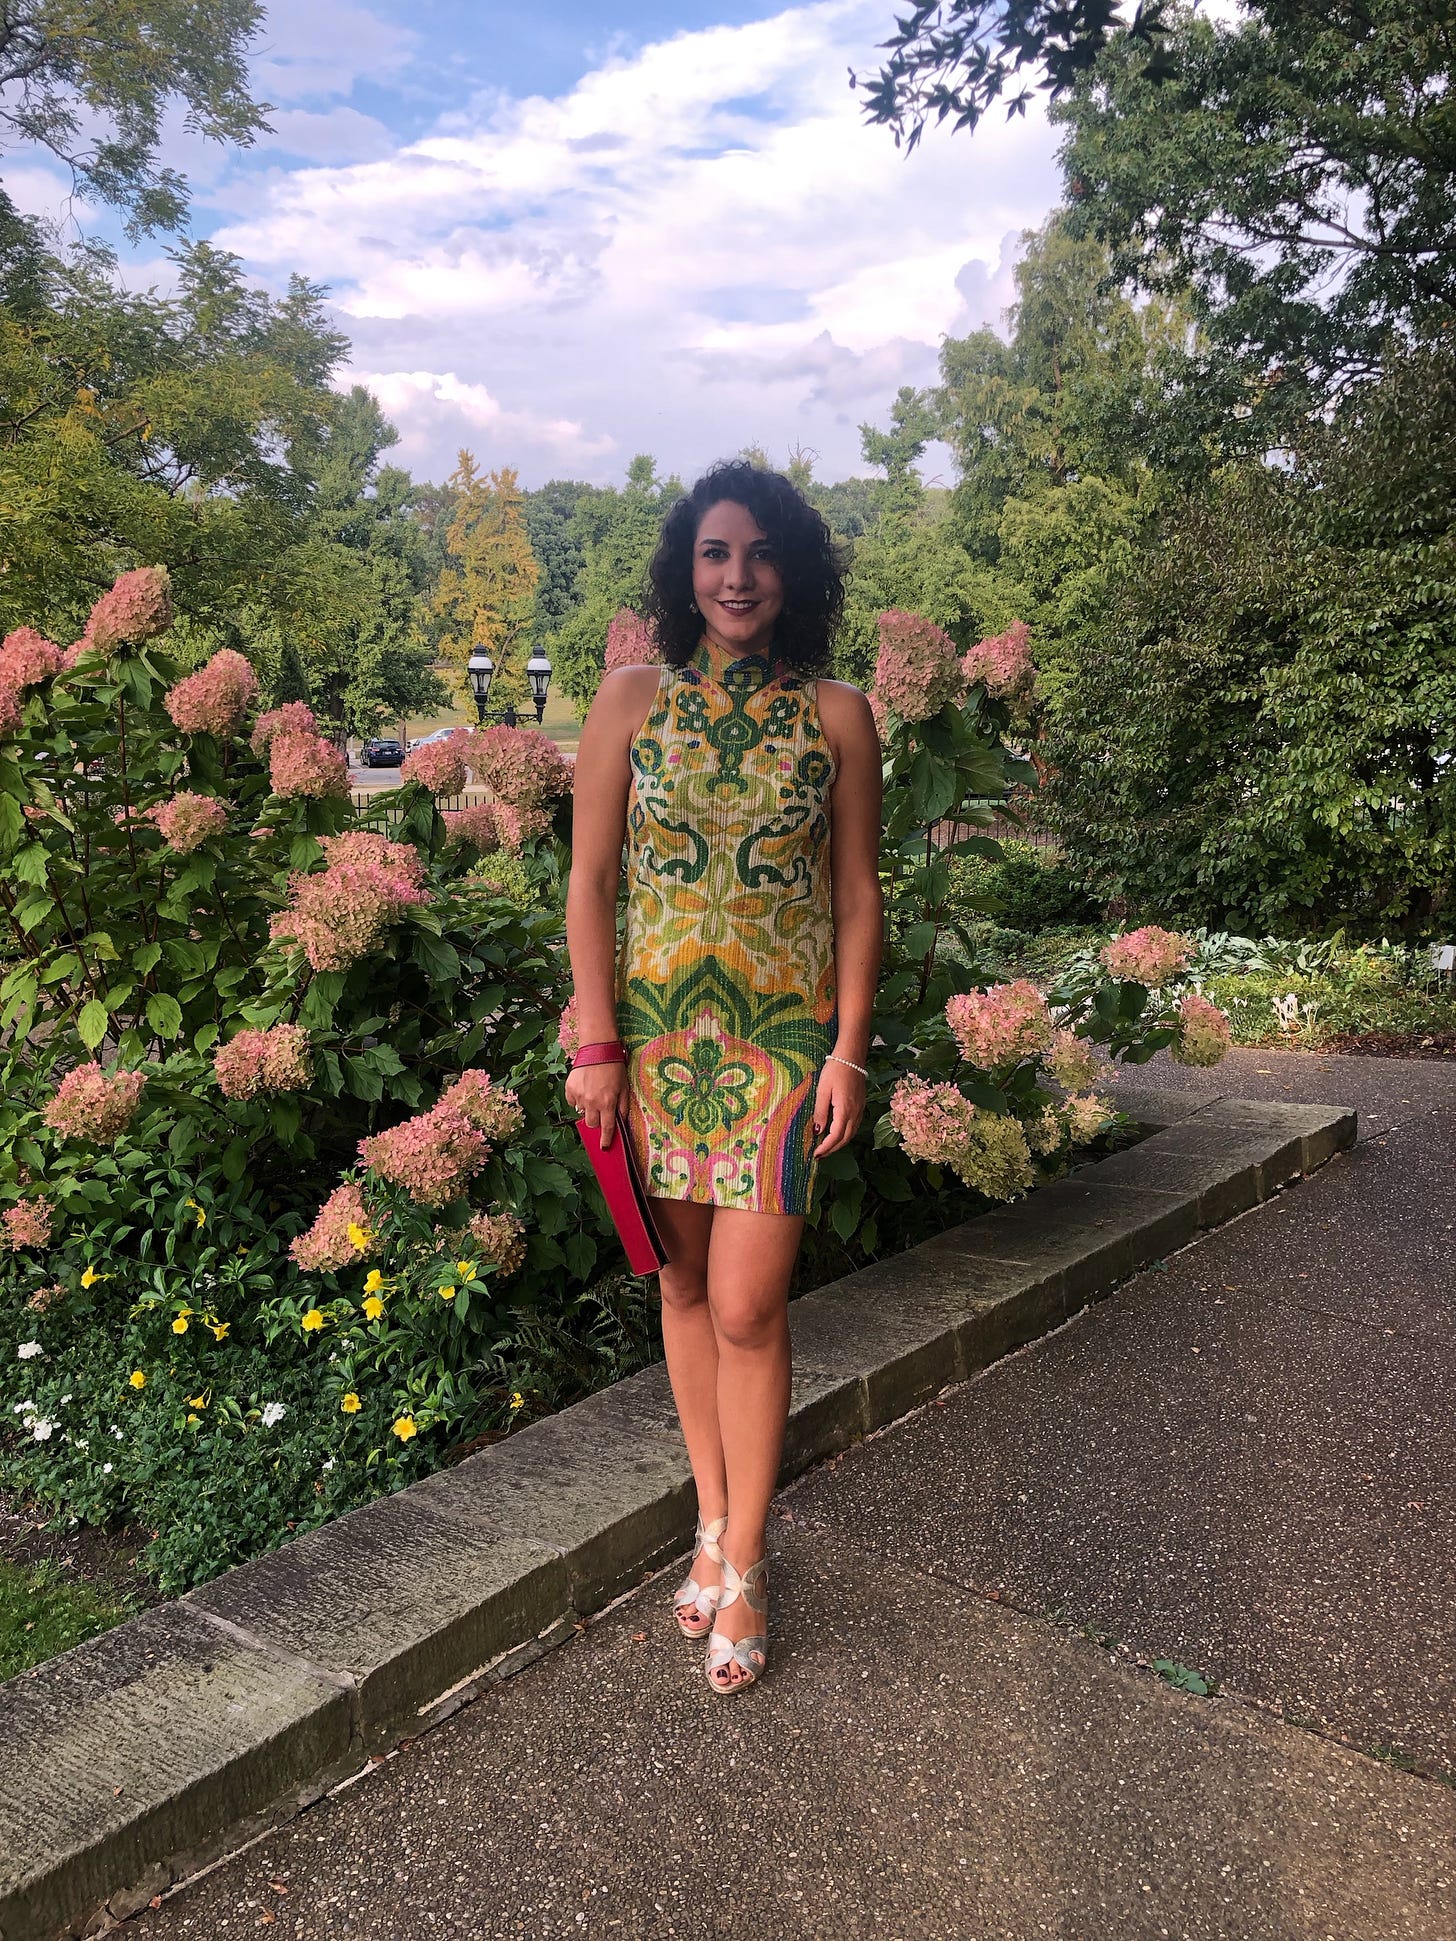 Elda stands in a park on a clear day in front of a pink hydrangea bush. Elda is smiling, her hair black and curly, and she wears a 60s pink and green mini dress and high tan heels